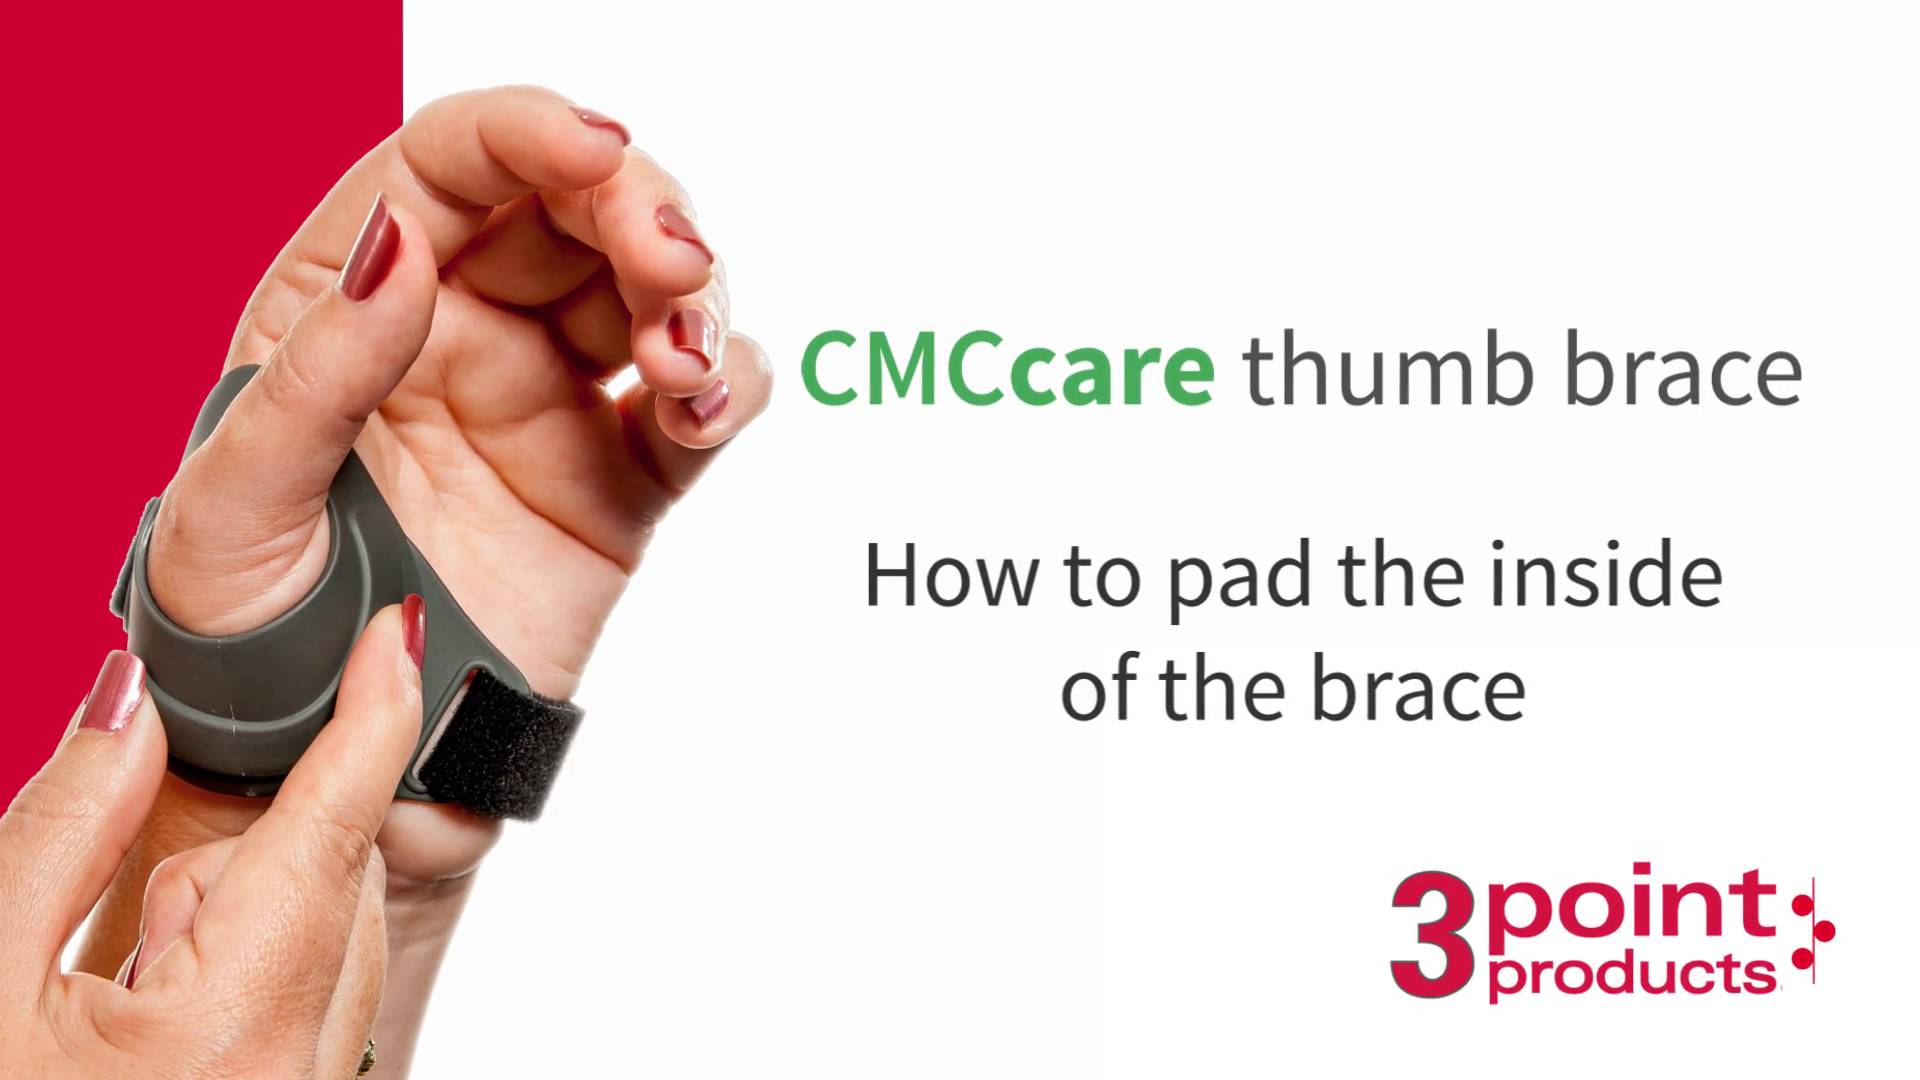 How to Pad the CMCcare Thumb Brace